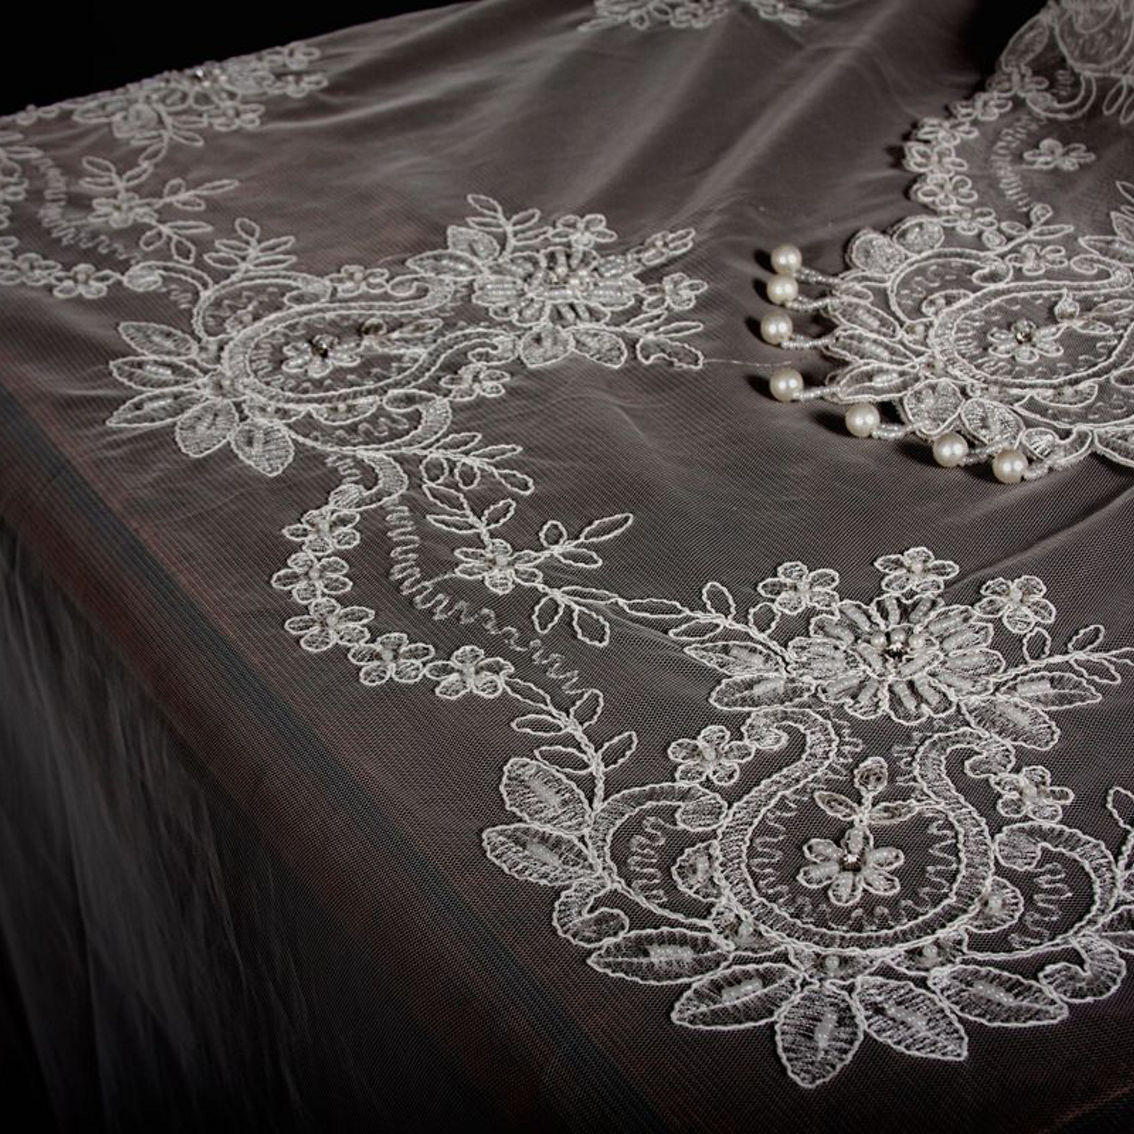 Manor Luxe, Paisley Lace Embroidered Tablecloth With Beaded Accents, 80 by 80-Inch - Image 3 of 3